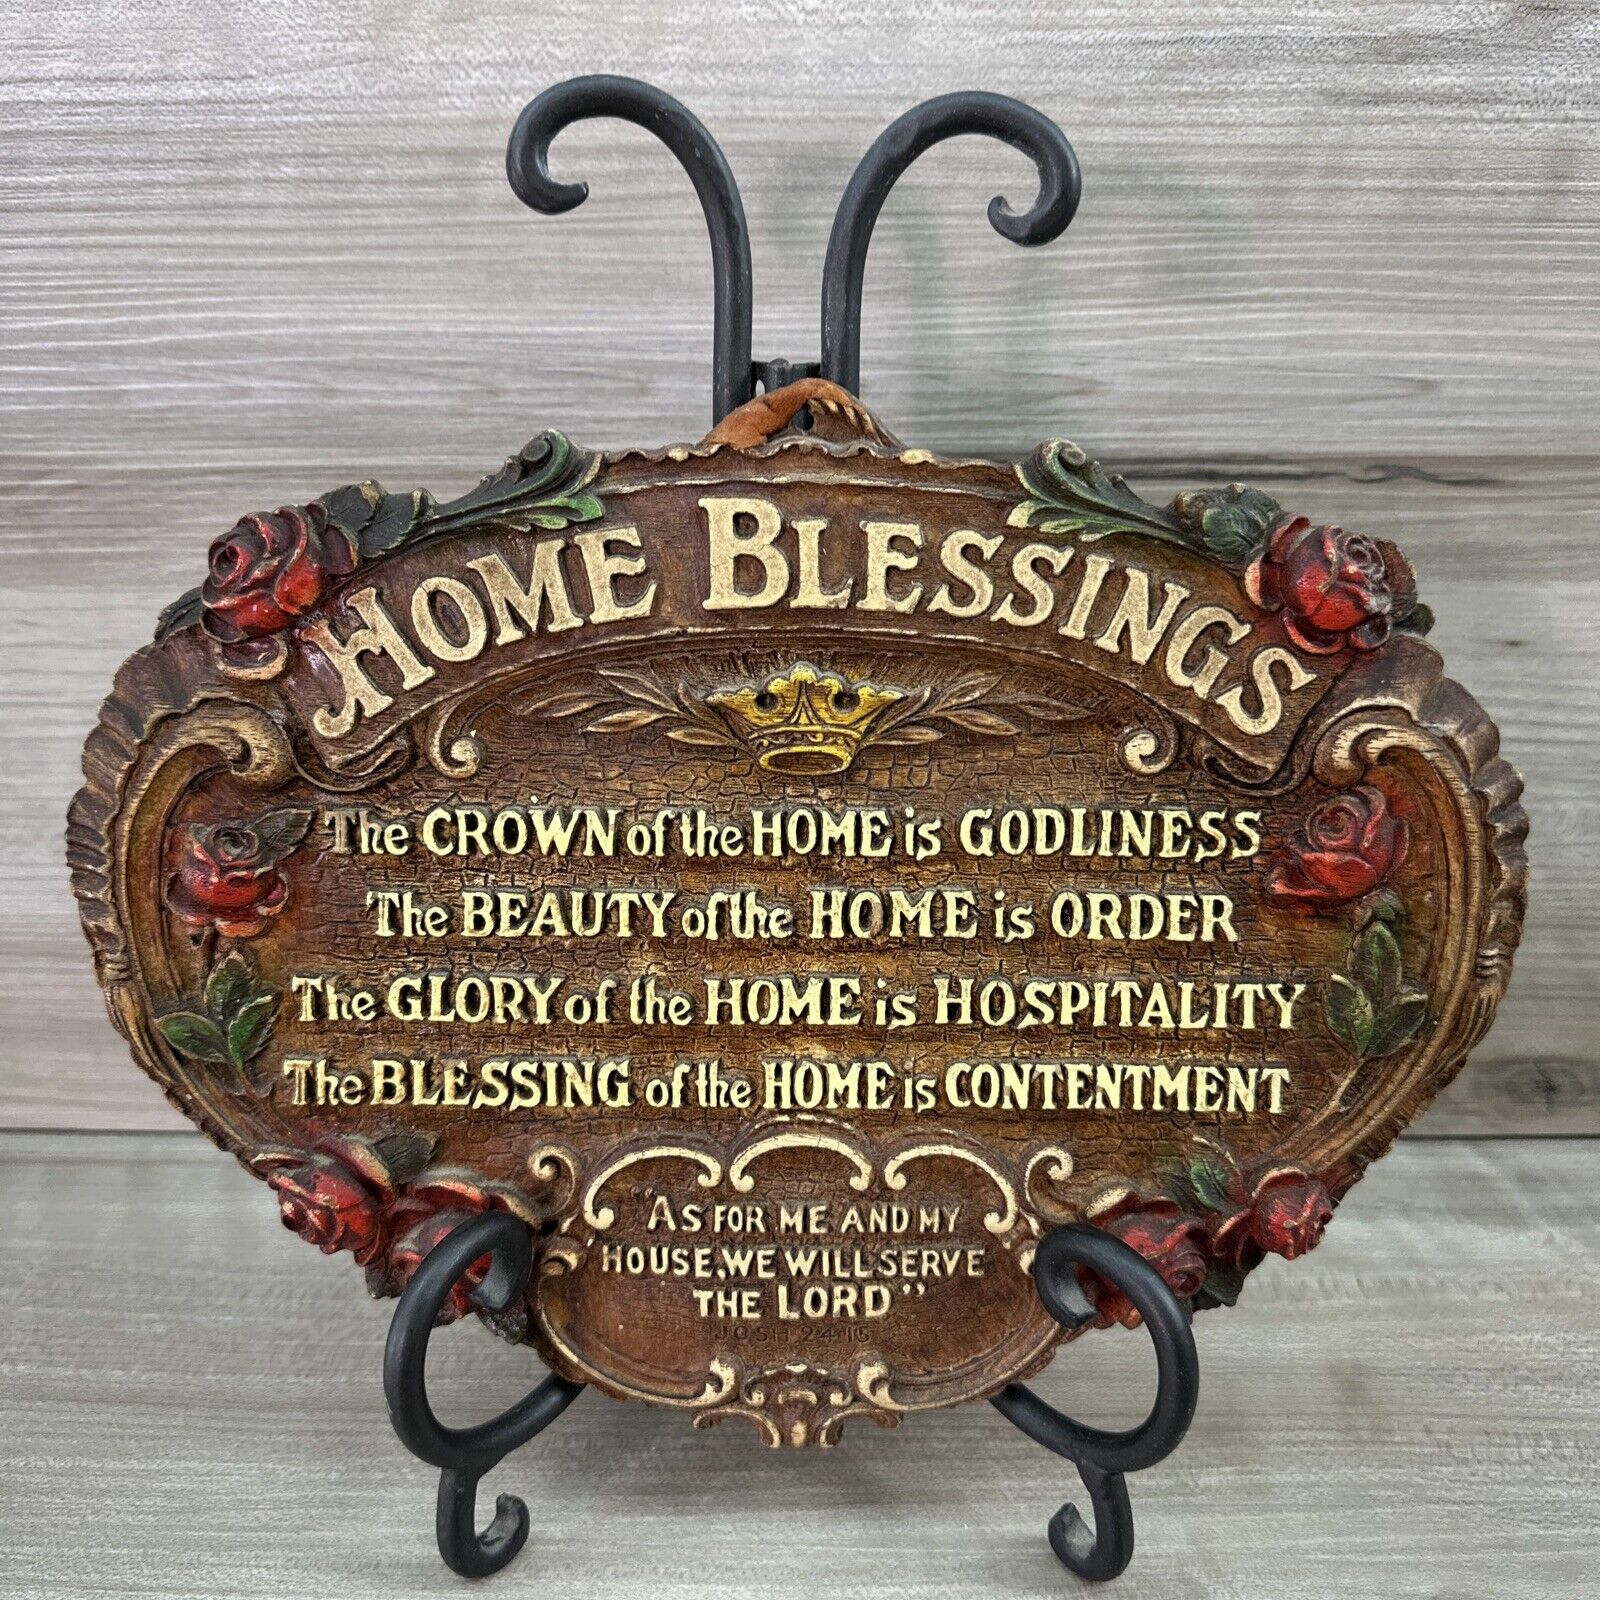 Home Blessings Art Wood Wall Plaque. 10.5”x7.5” Rustic Vintage Retro Religious